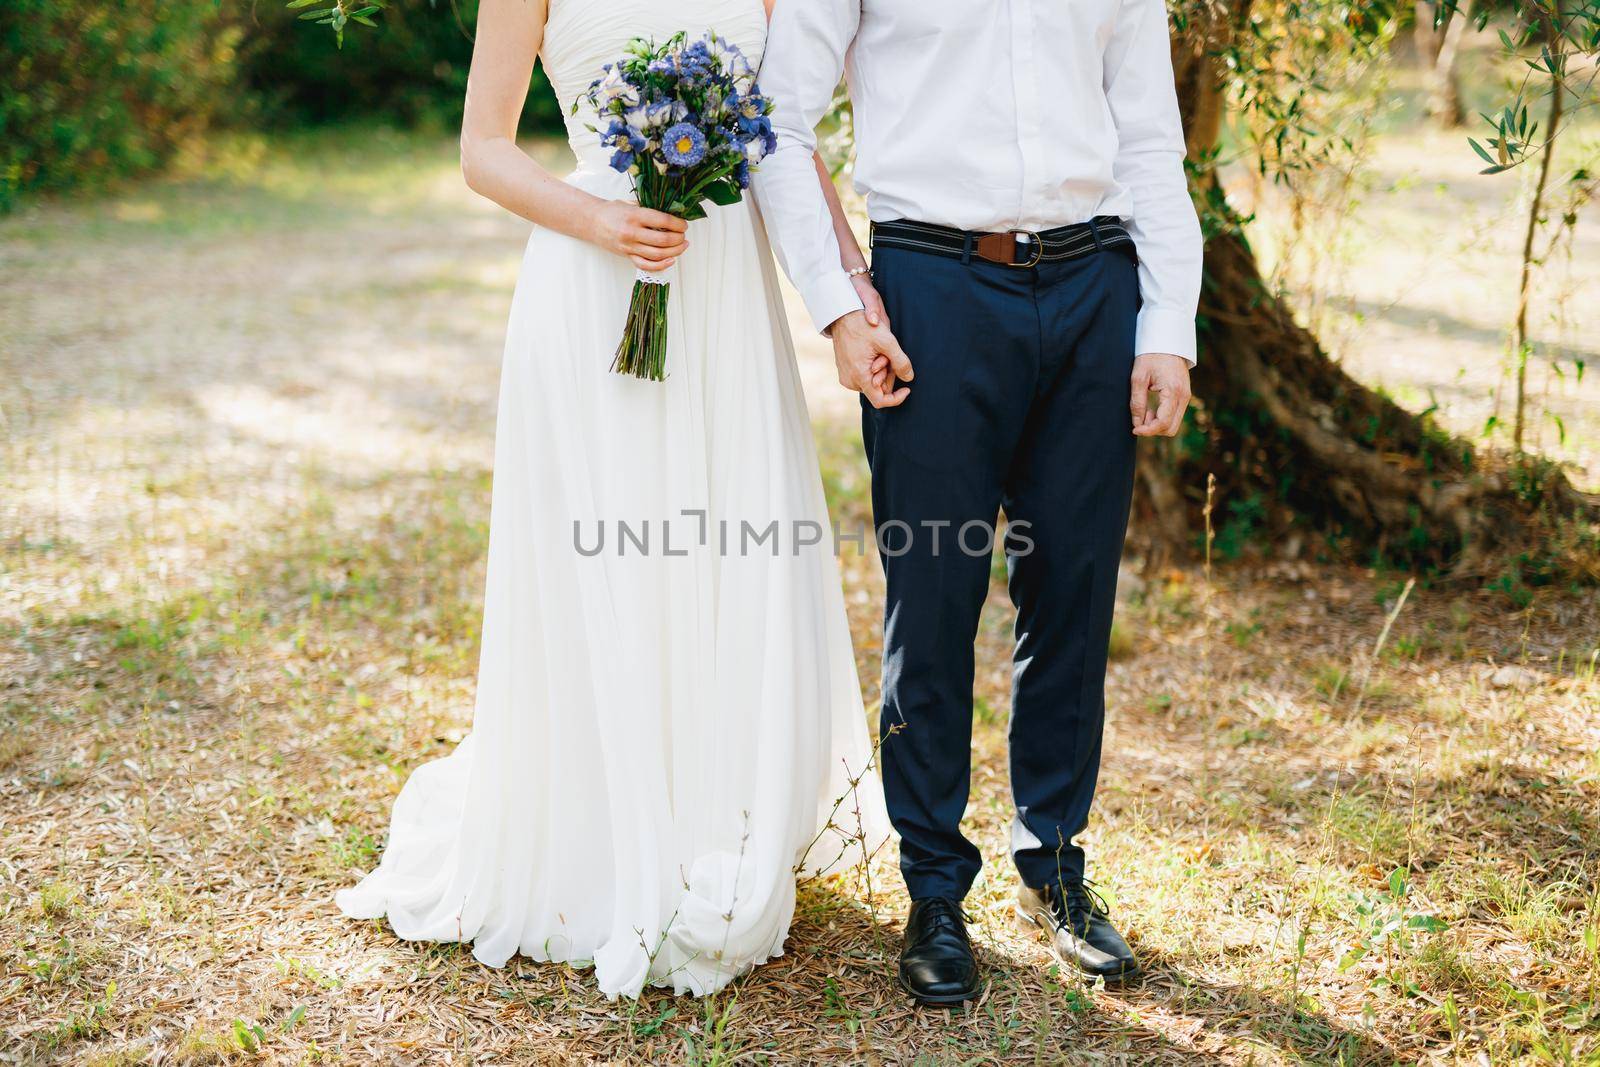 Bride with a bouquet of blue flowers and the groom stand side by side in the olive grove and hold hands by Nadtochiy